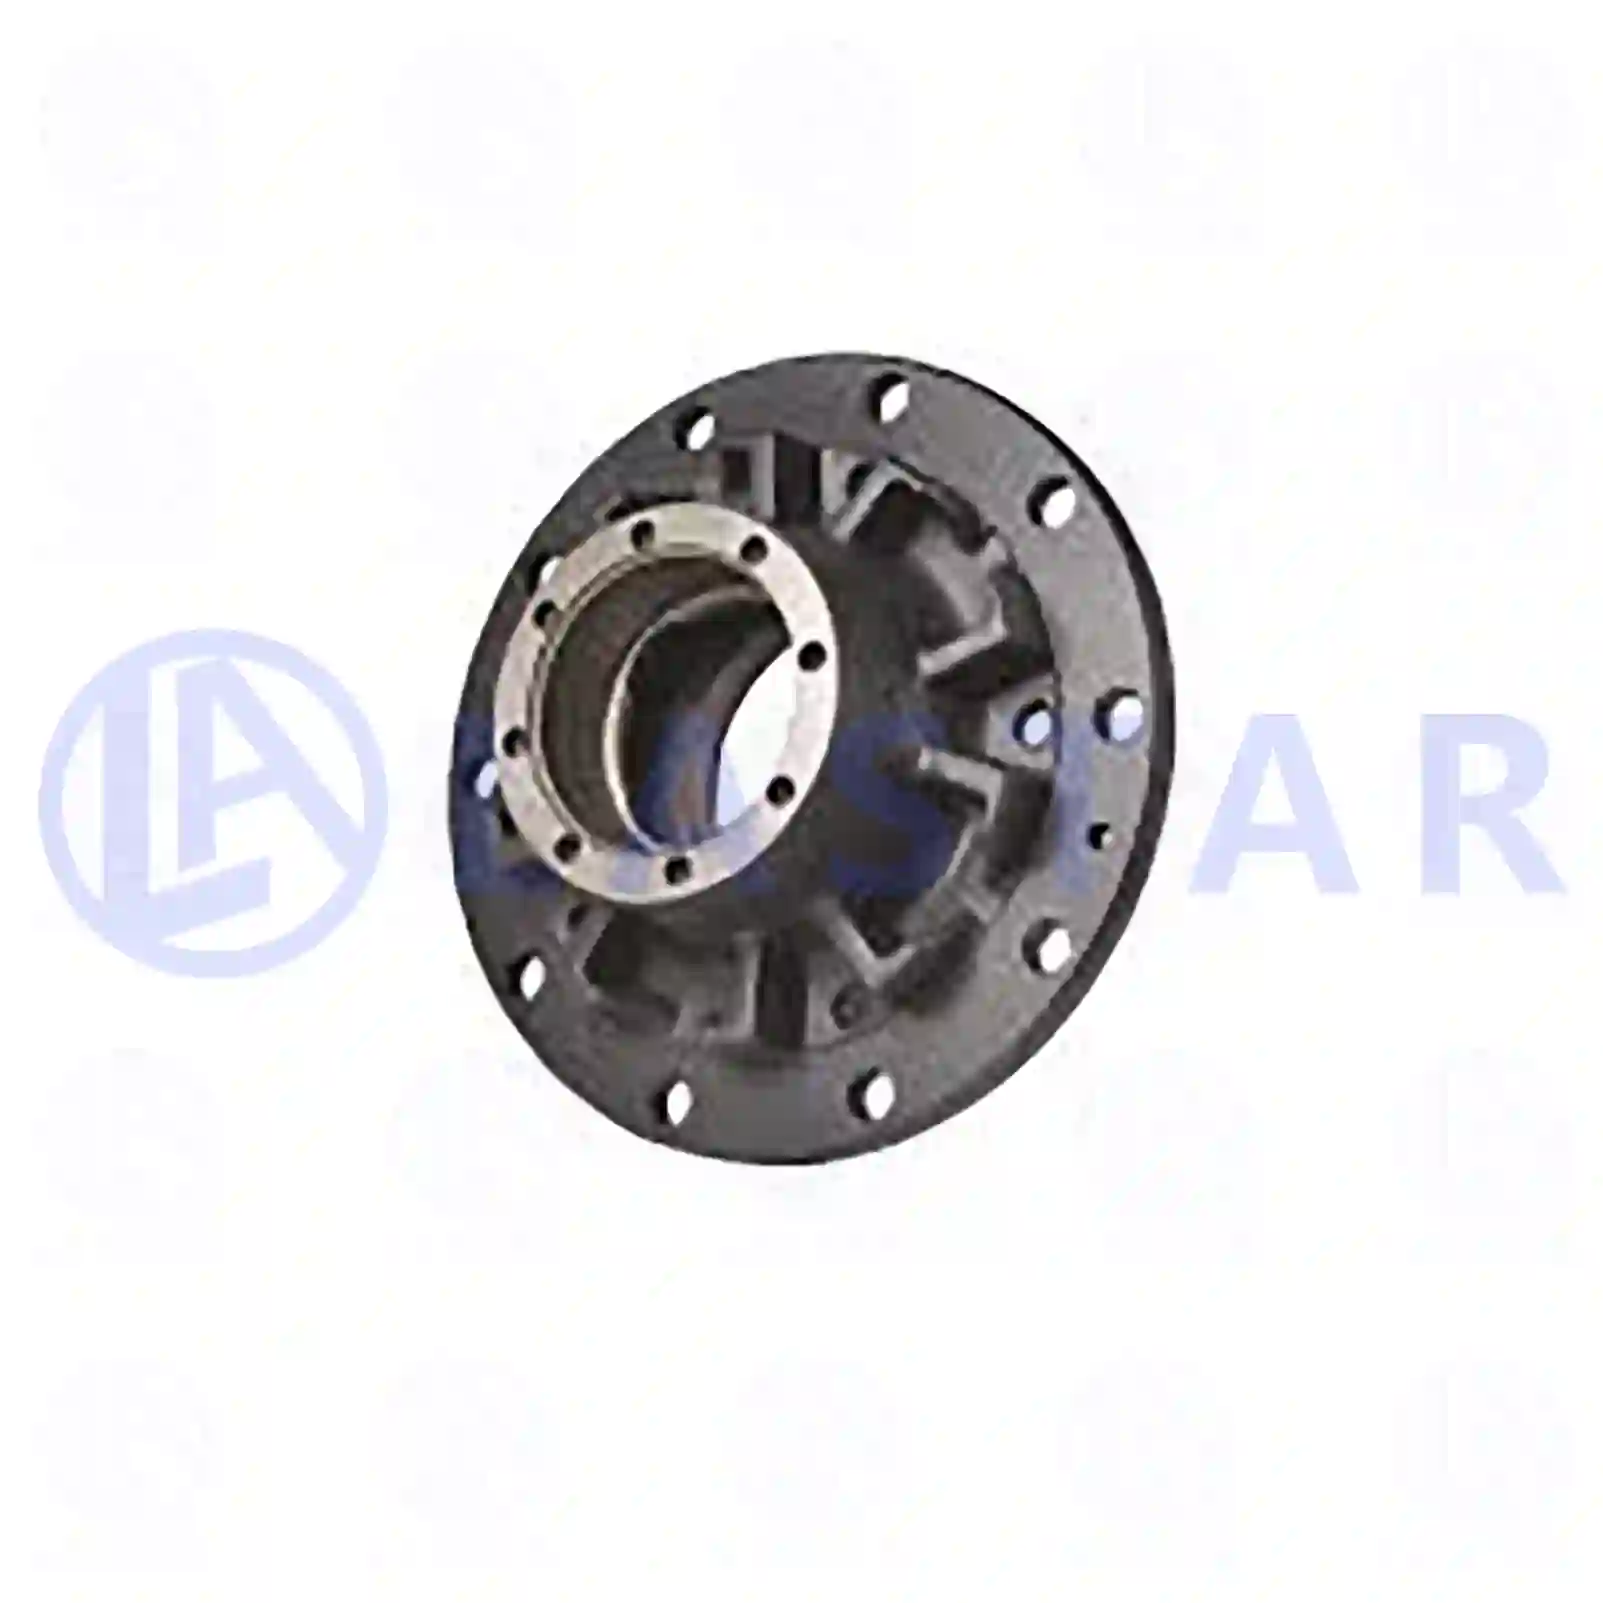 Wheel hub, without bearings, 77726066, 337563, , , , , ||  77726066 Lastar Spare Part | Truck Spare Parts, Auotomotive Spare Parts Wheel hub, without bearings, 77726066, 337563, , , , , ||  77726066 Lastar Spare Part | Truck Spare Parts, Auotomotive Spare Parts